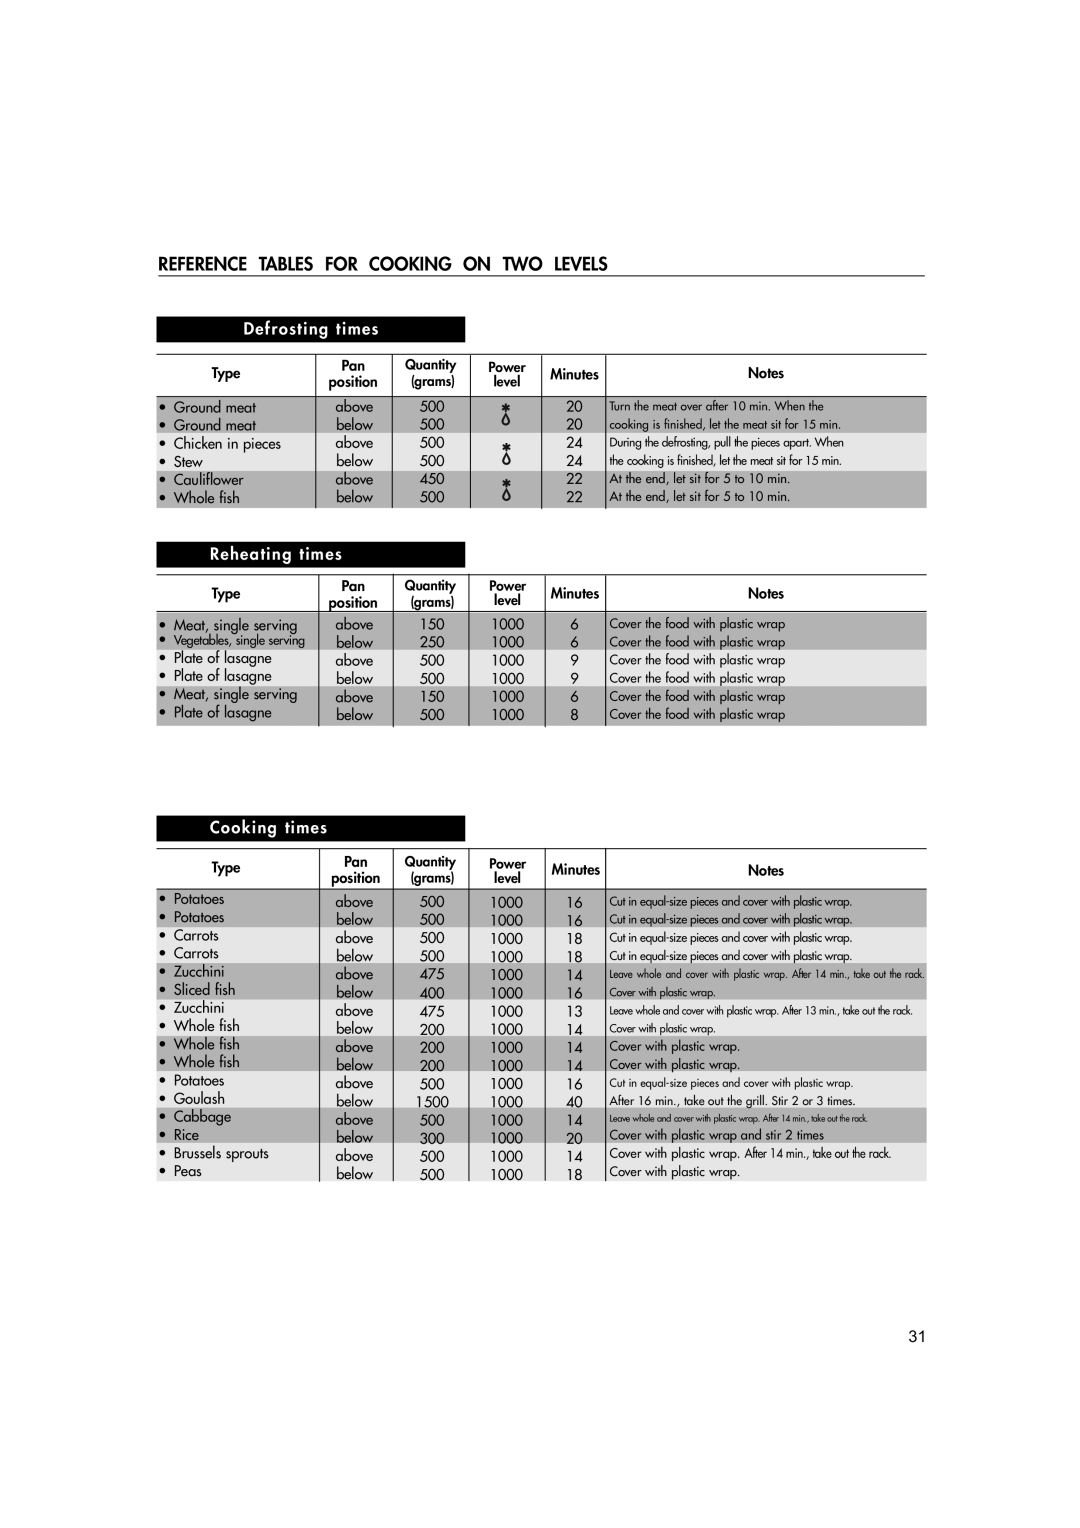 Hotpoint MWHZ33 manual Reference Tables For Cooking On Two Levels, Defrosting times, Reheating times, Cooking times 